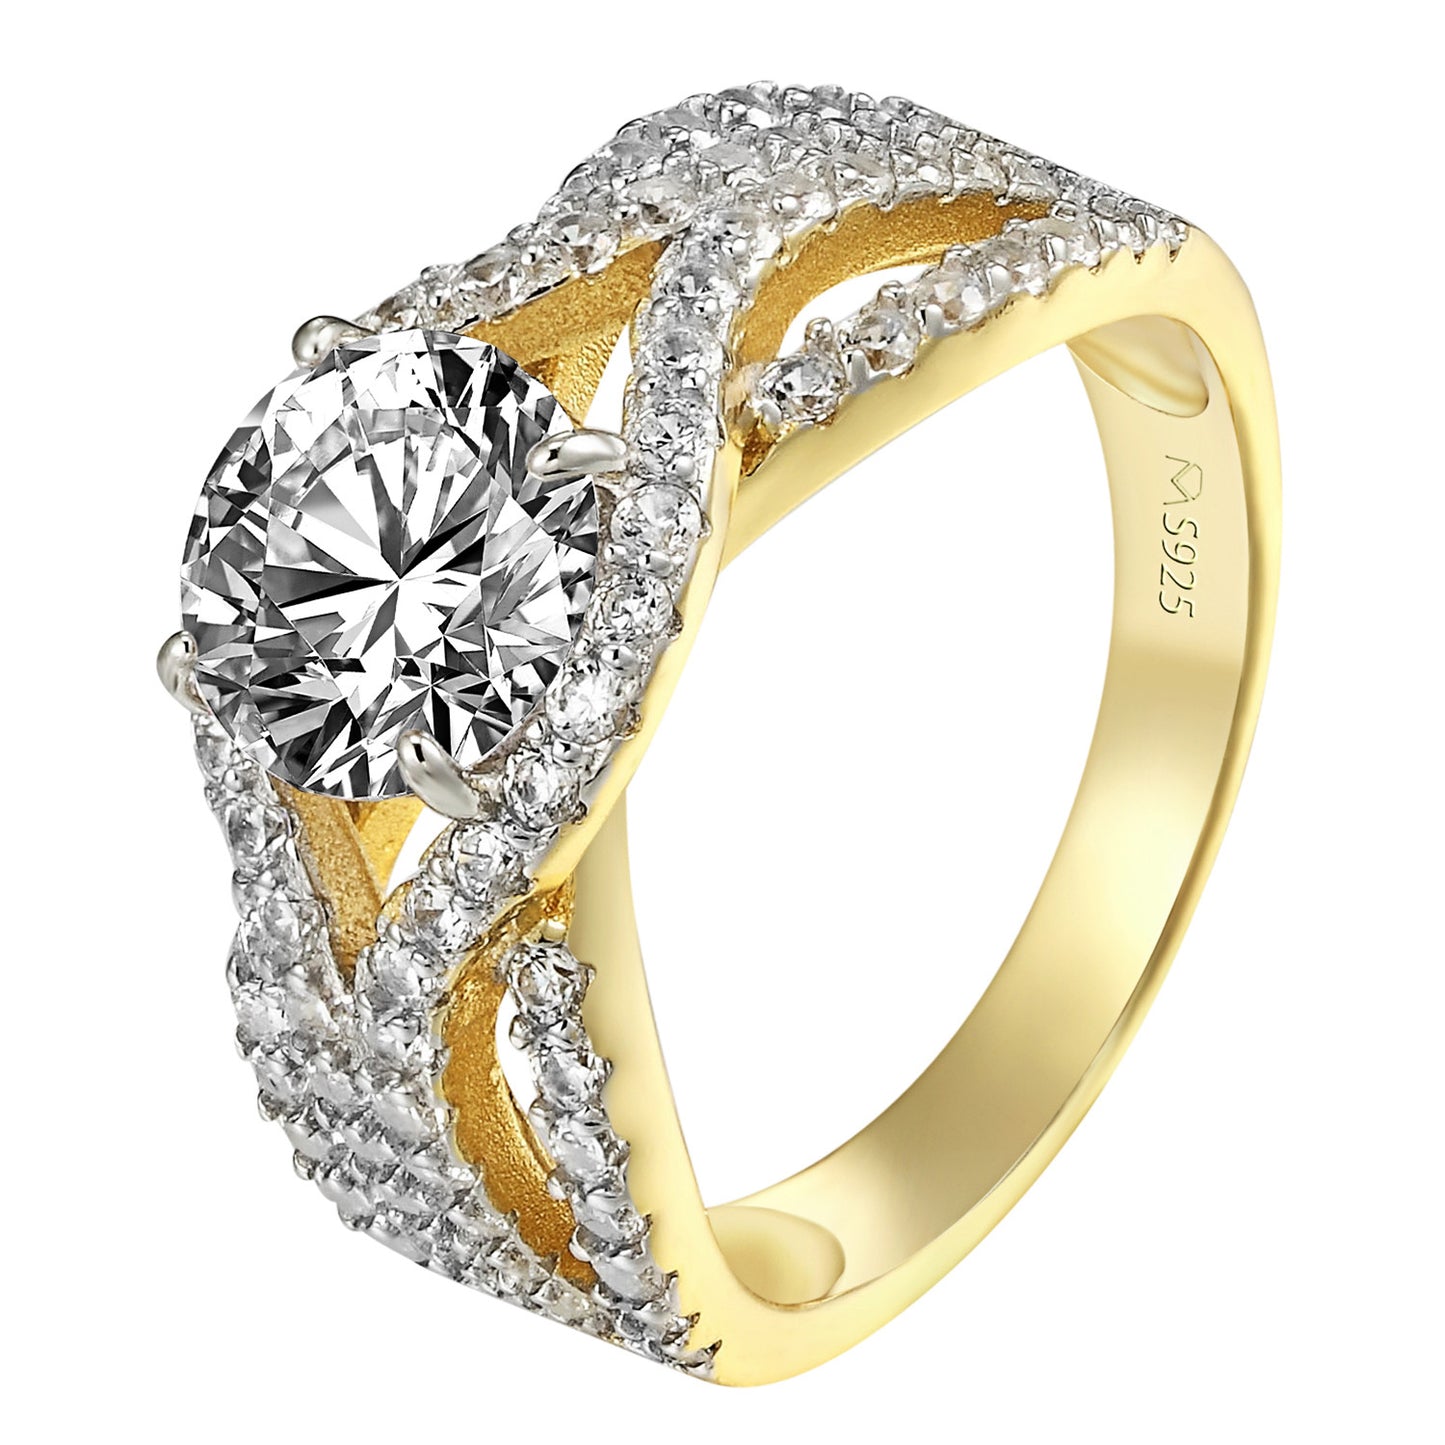 Sterling Silver Wedding Solitaire Ring Womens 14k Gold Over 925 Silver CZ Bridal